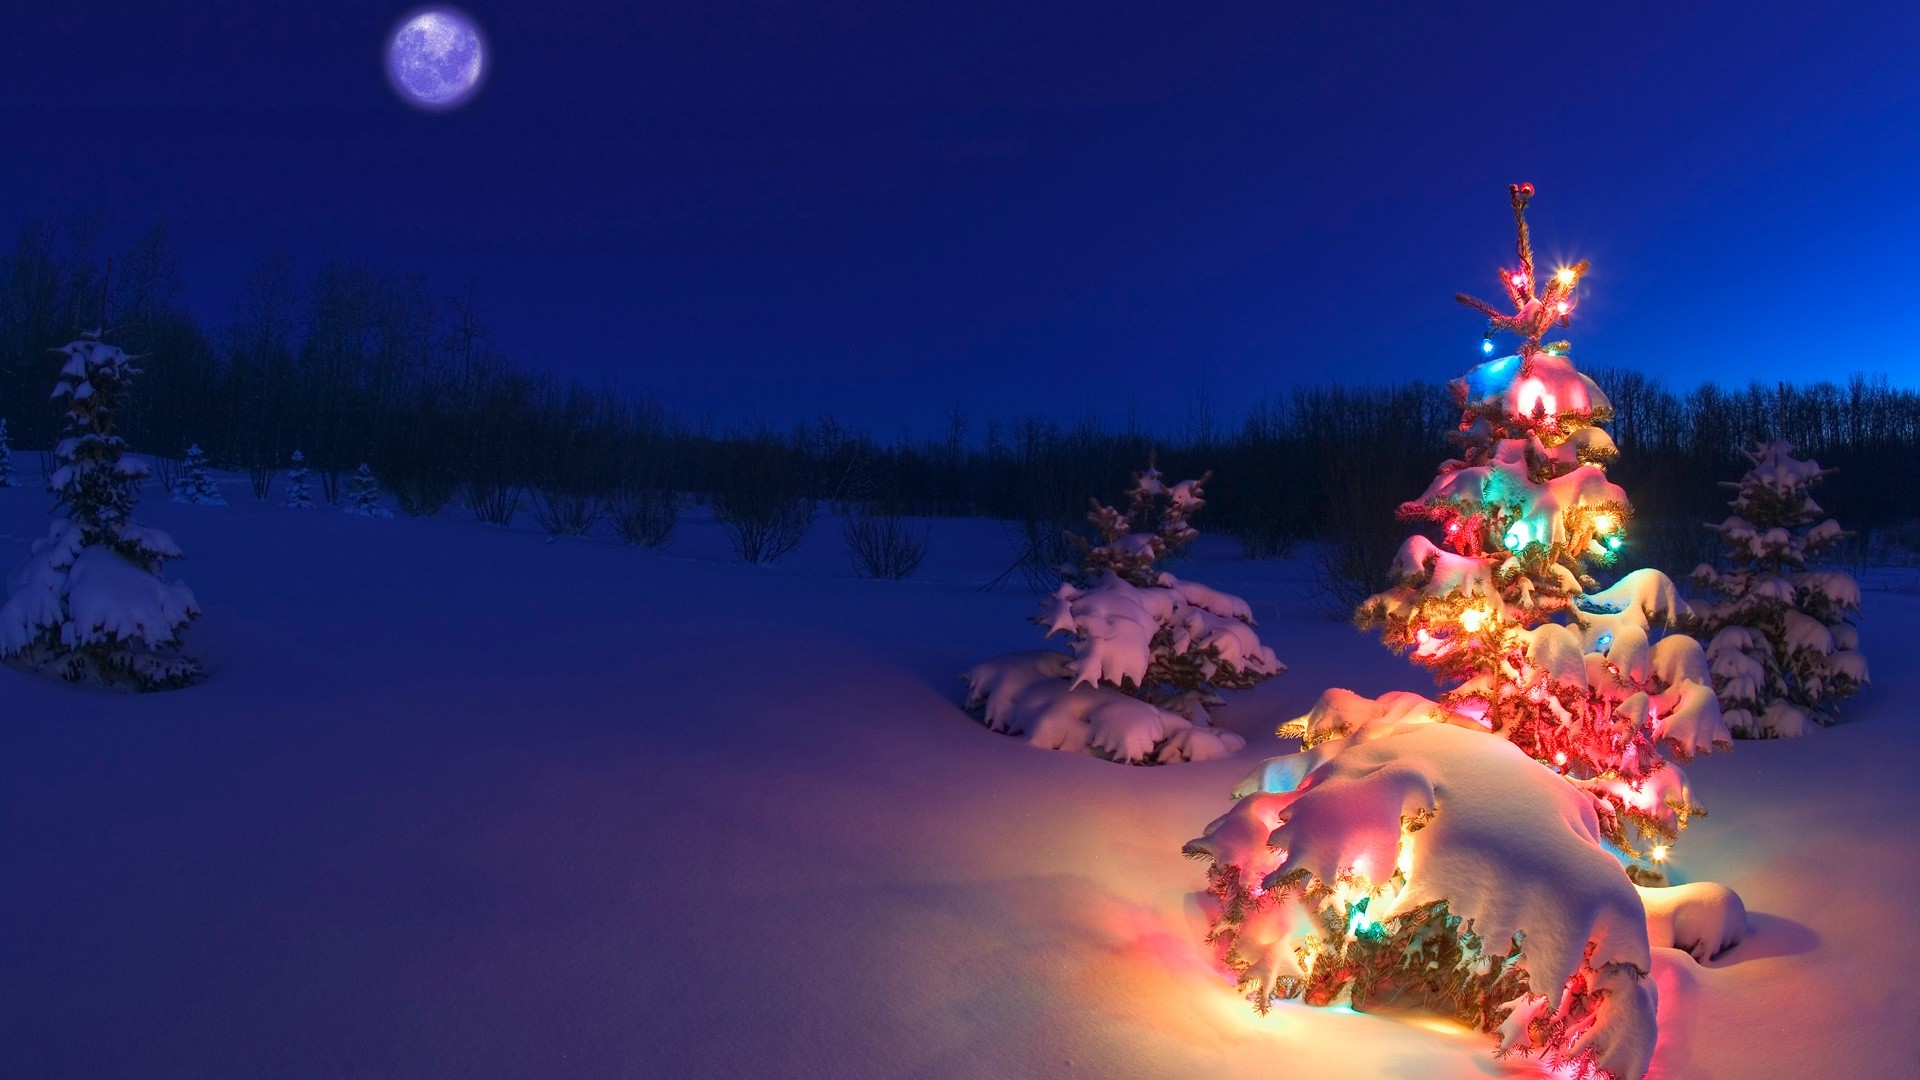 1920x1080 Christmas Wallpaper HD with Snow and Moon